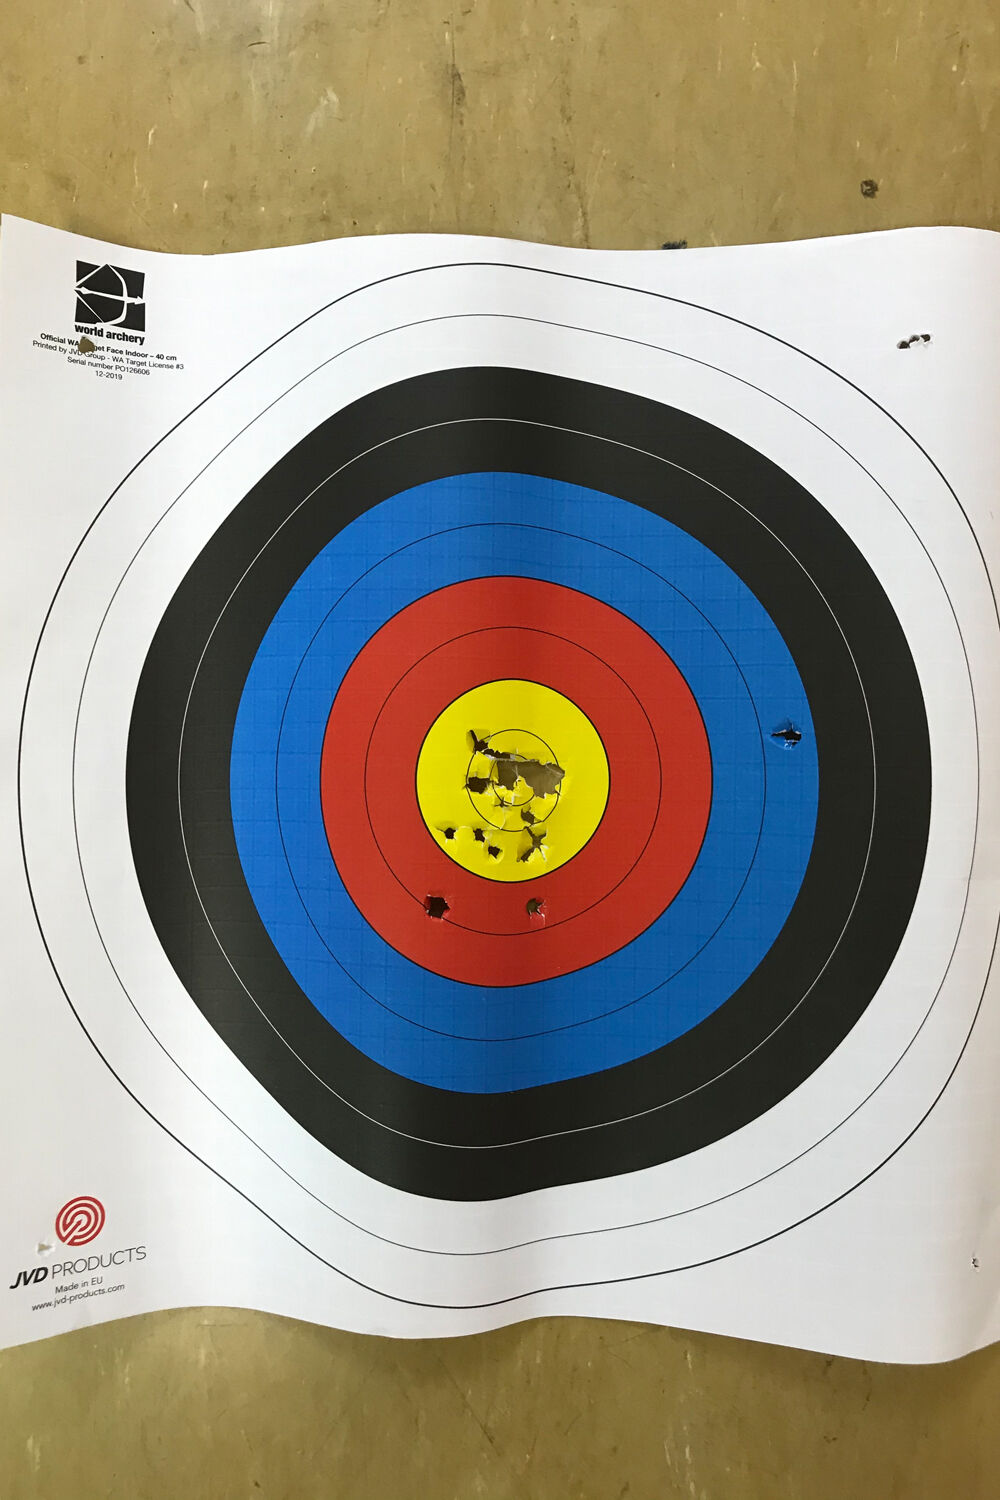 Erik Jonsson’s first-half target for the fourth remote stage of the 2021 Indoor Archery World Series.